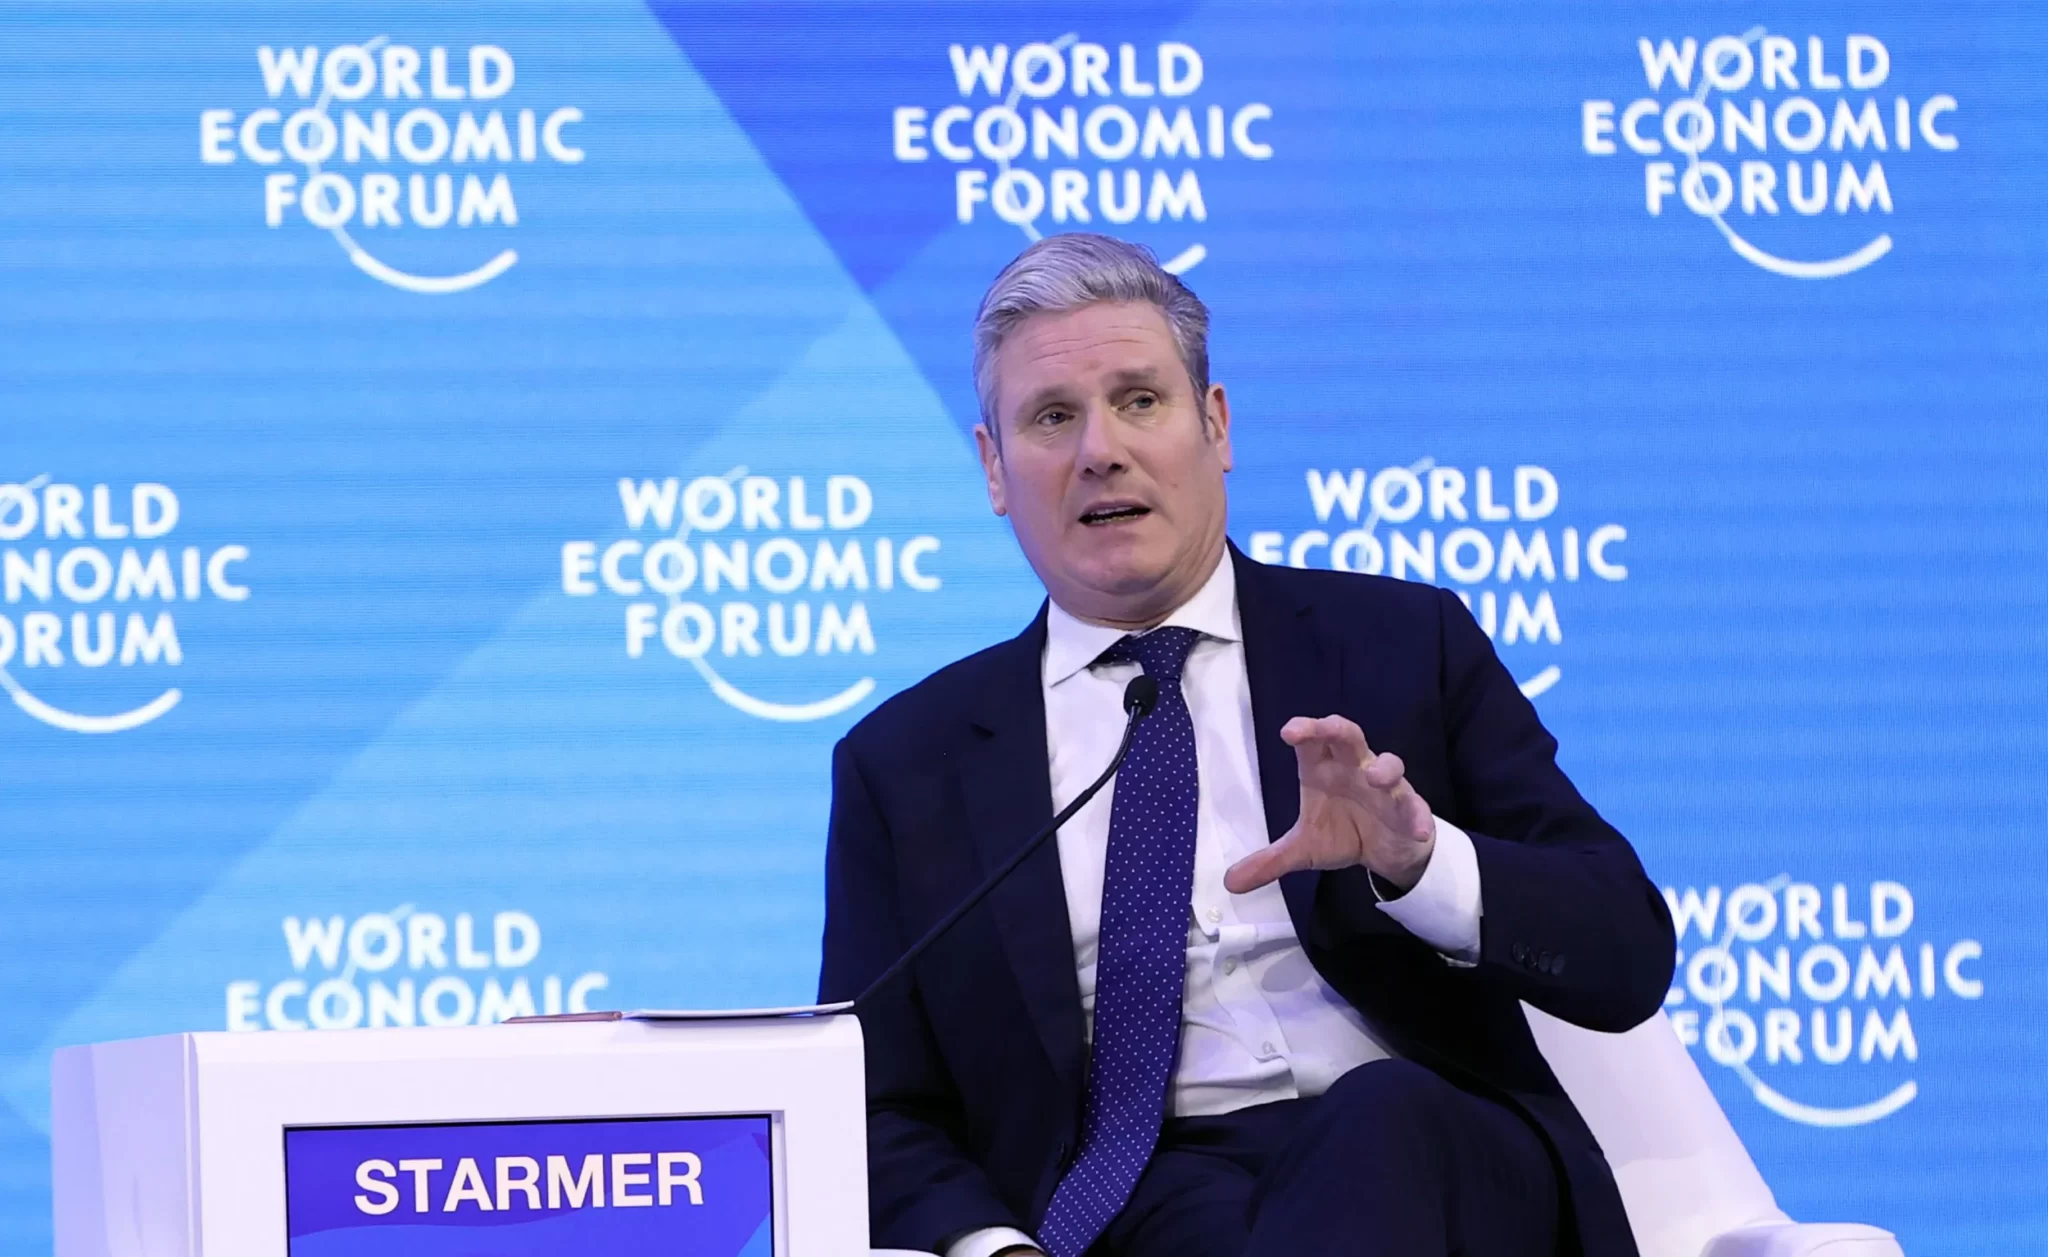 Image of Keir Starmer sucking up to the rich and powerful at the World Economic Forum, Davos